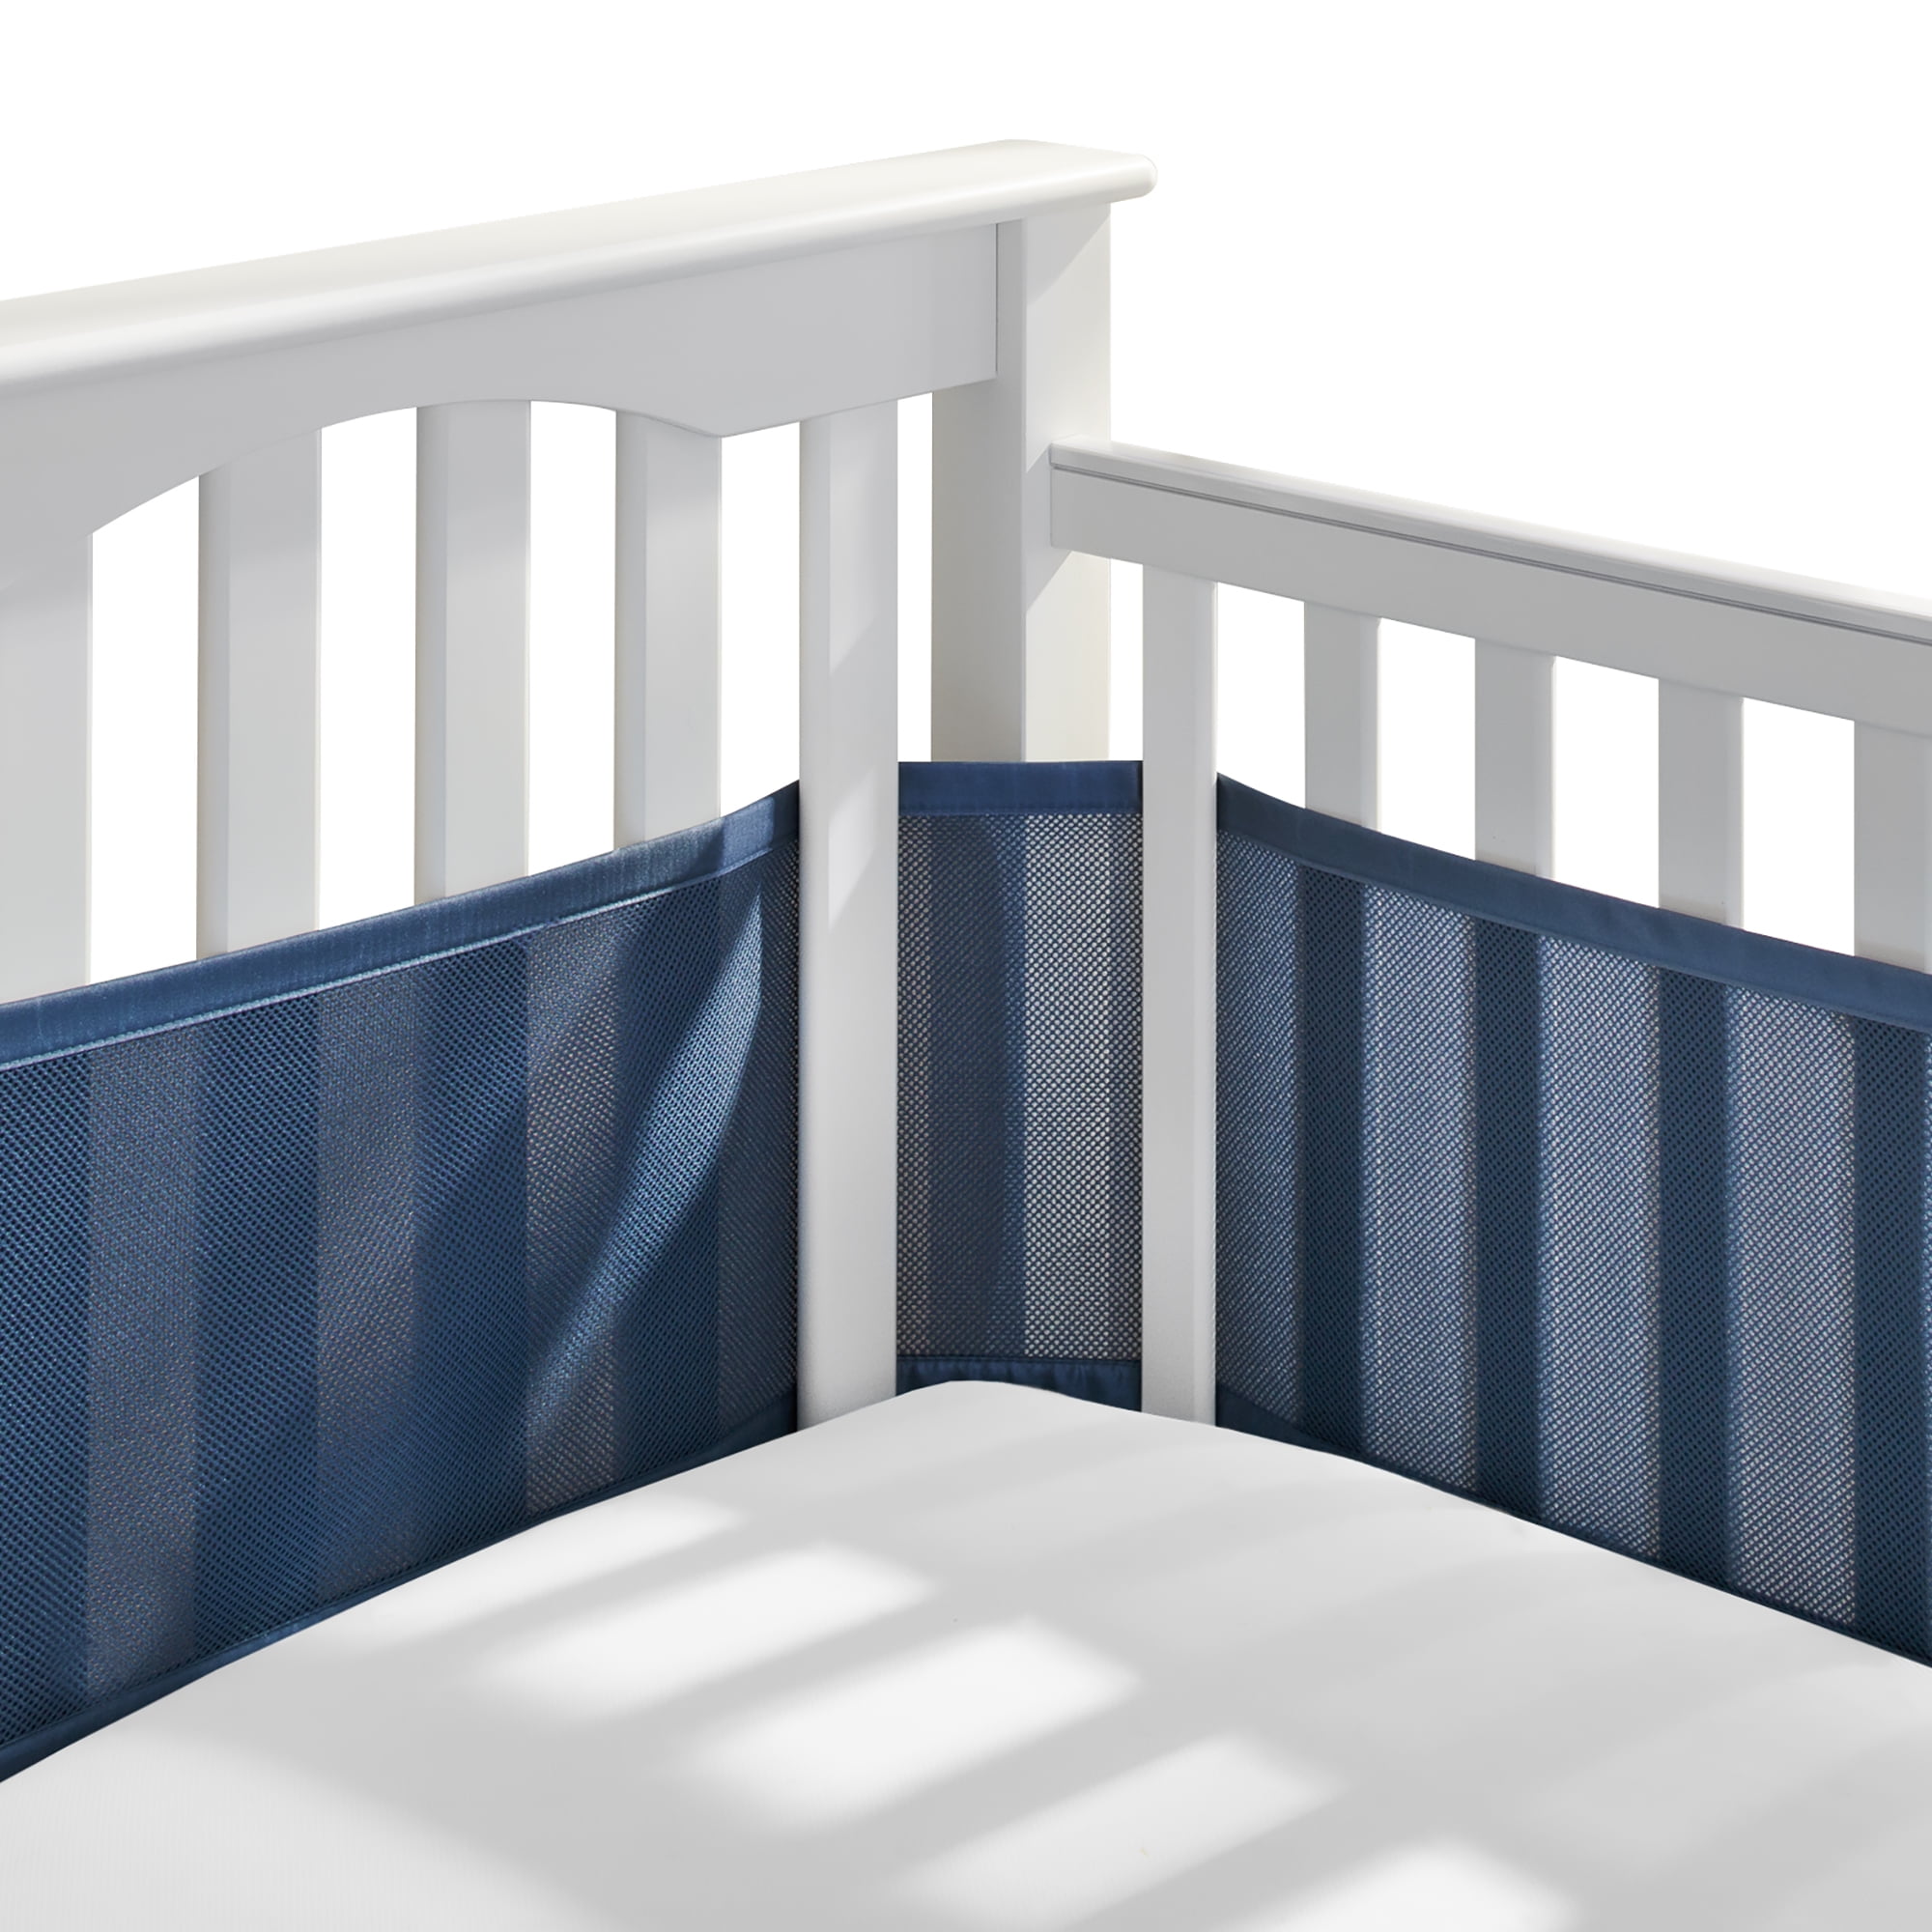 BreathableBaby Breathable Mesh Liner for Full-Size Cribs, Sheer Deluxe 5mm  Mesh, Clouds (Size 4FS Covers 3 or 4 Sides)